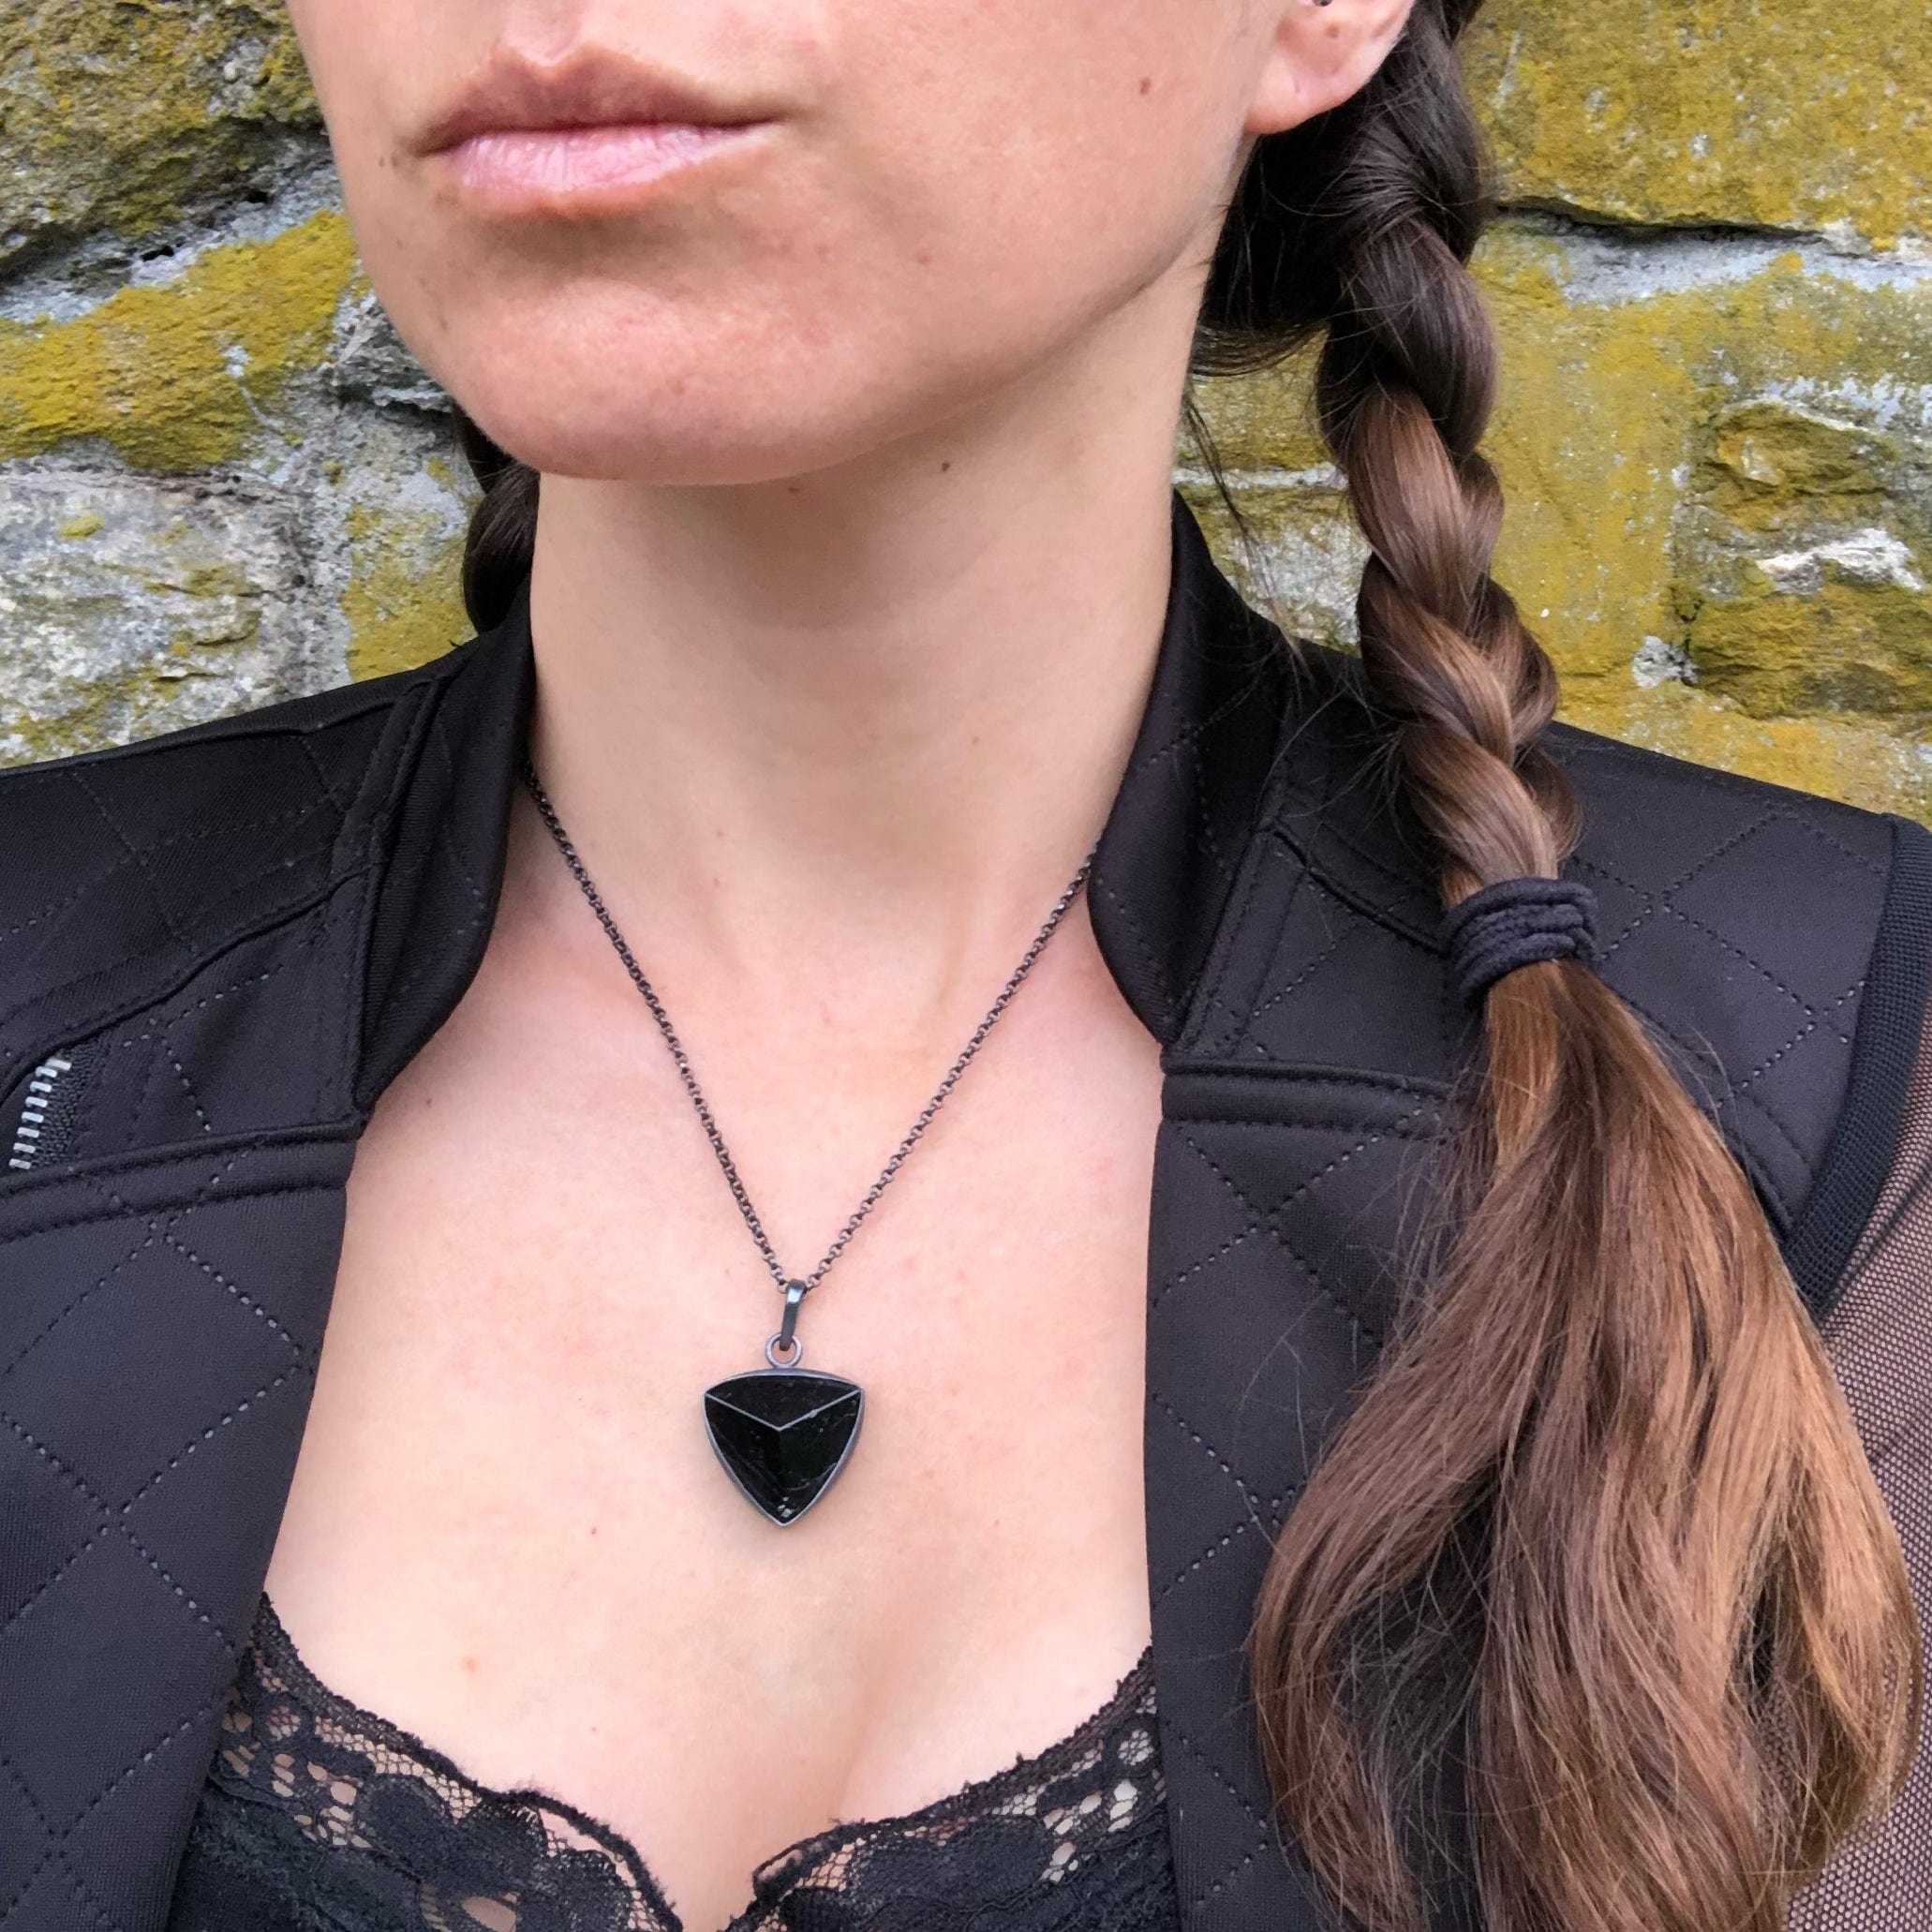 Black Tourmaline Shield Pendant. Part of the Season of the Witch collection by Alex Lozier Jewelry.